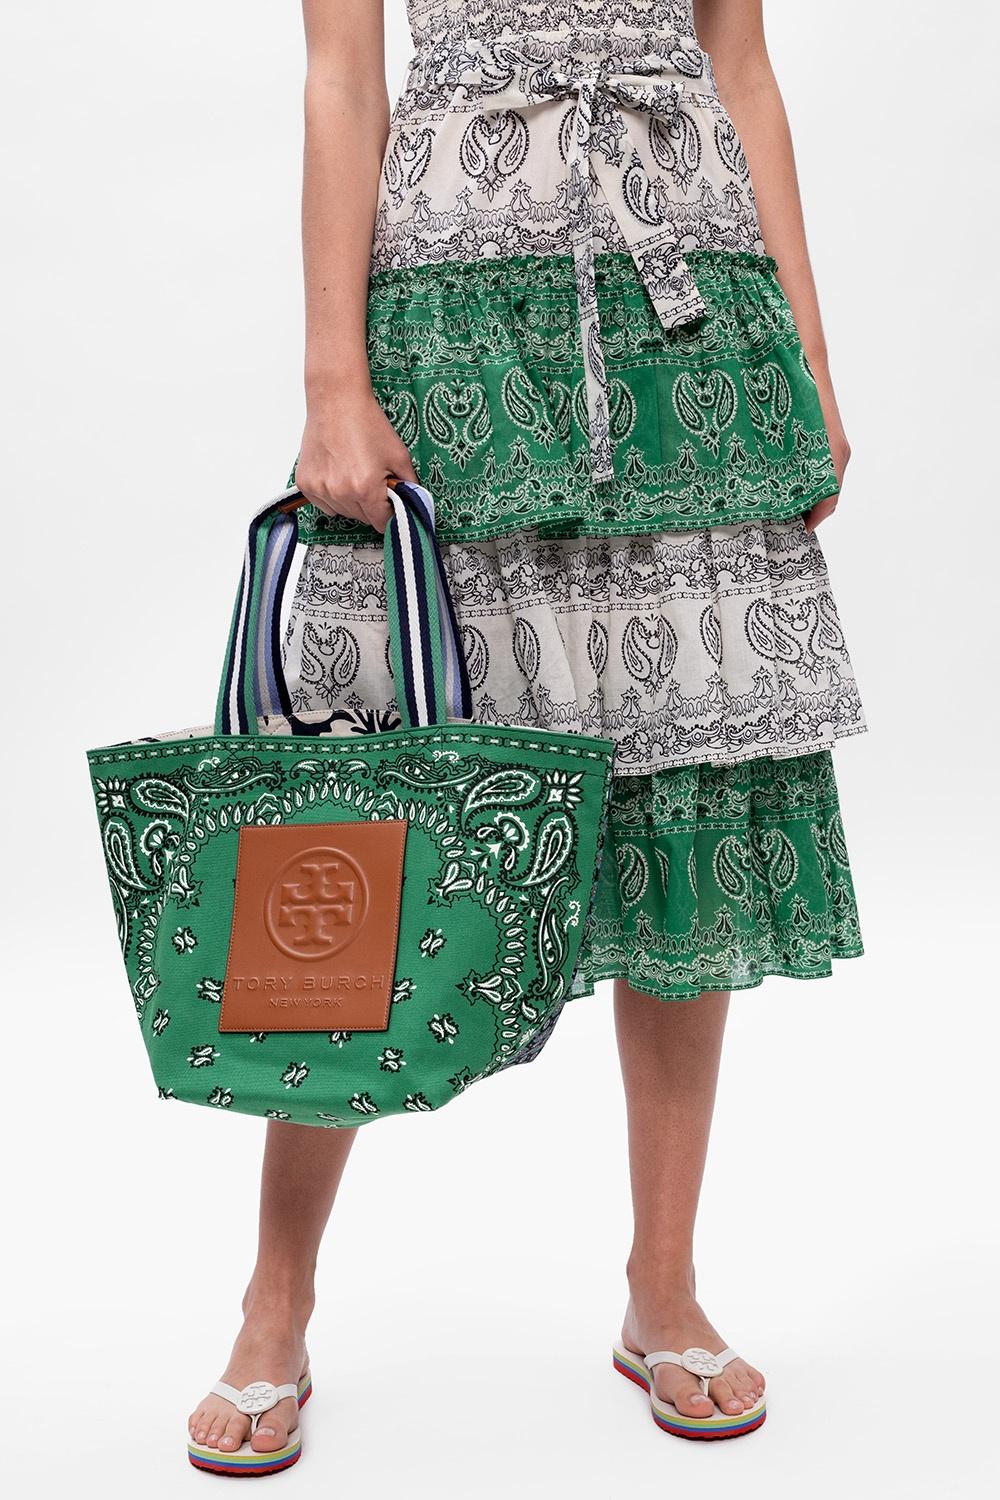 Tory Burch Gracie Reversible Printed Canvas Tote Bag in Green | Lyst